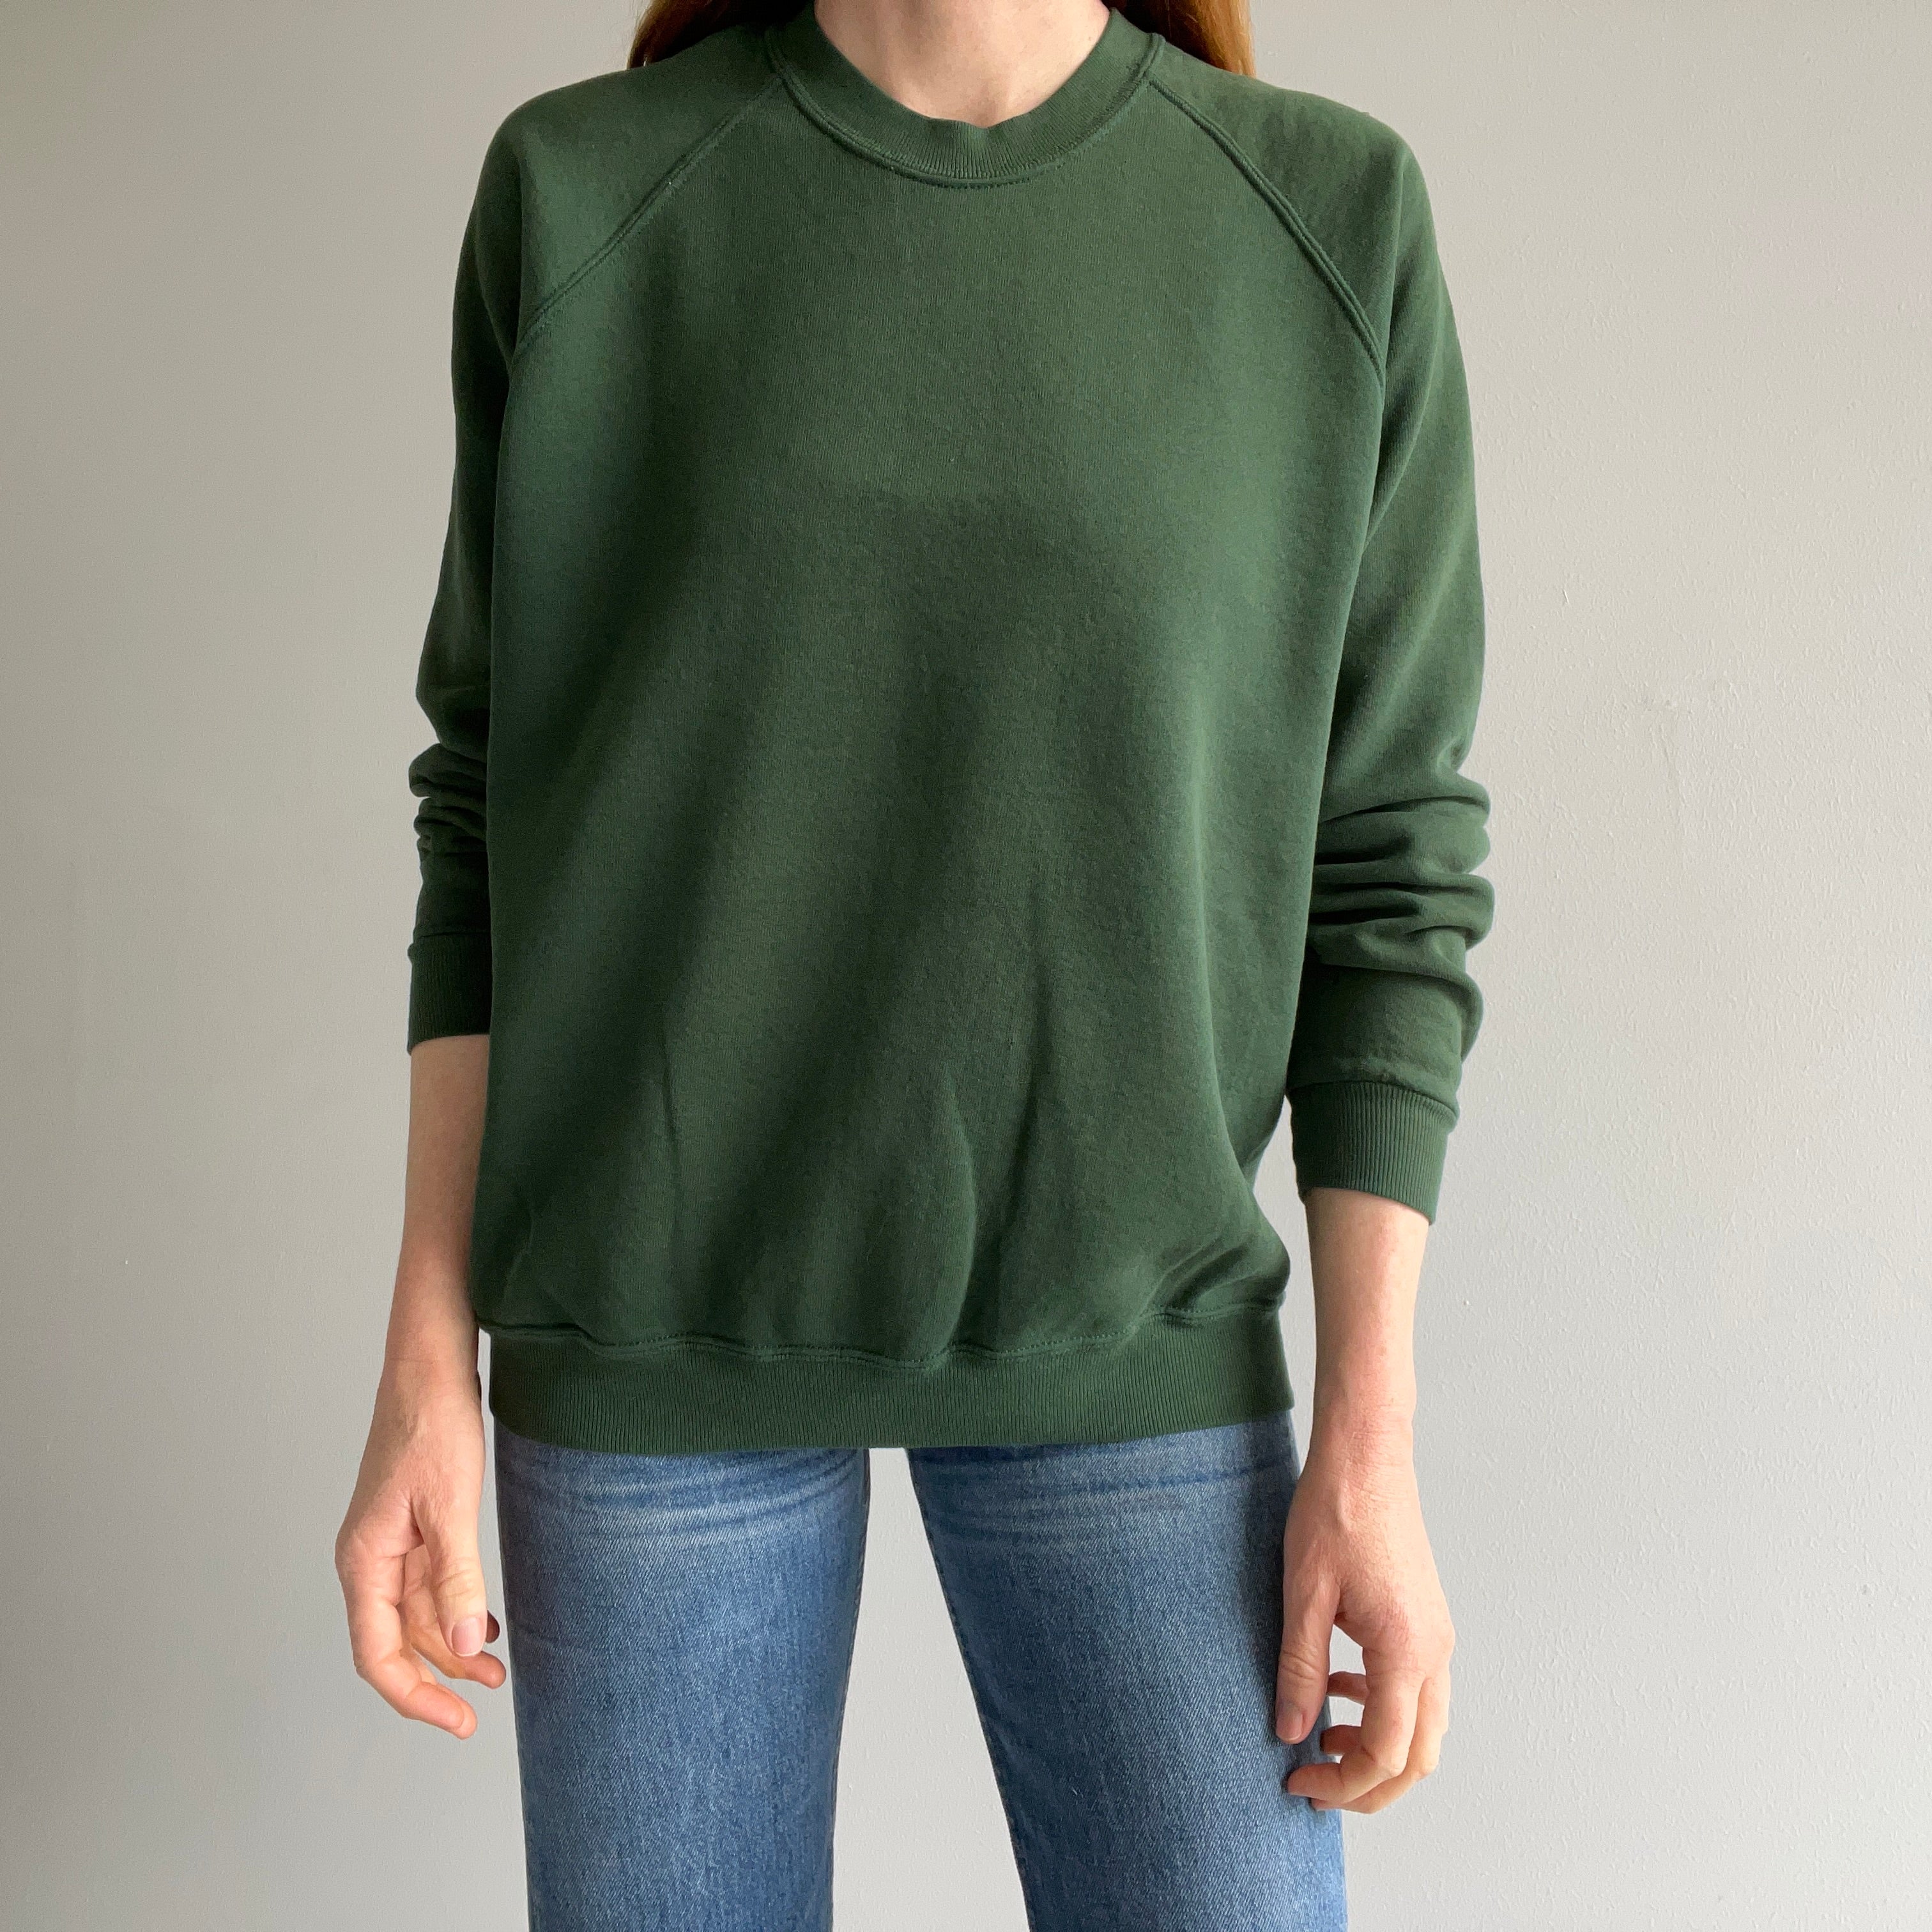 1980s Thinned Out Dark Green Sweatshirt by Jerzees